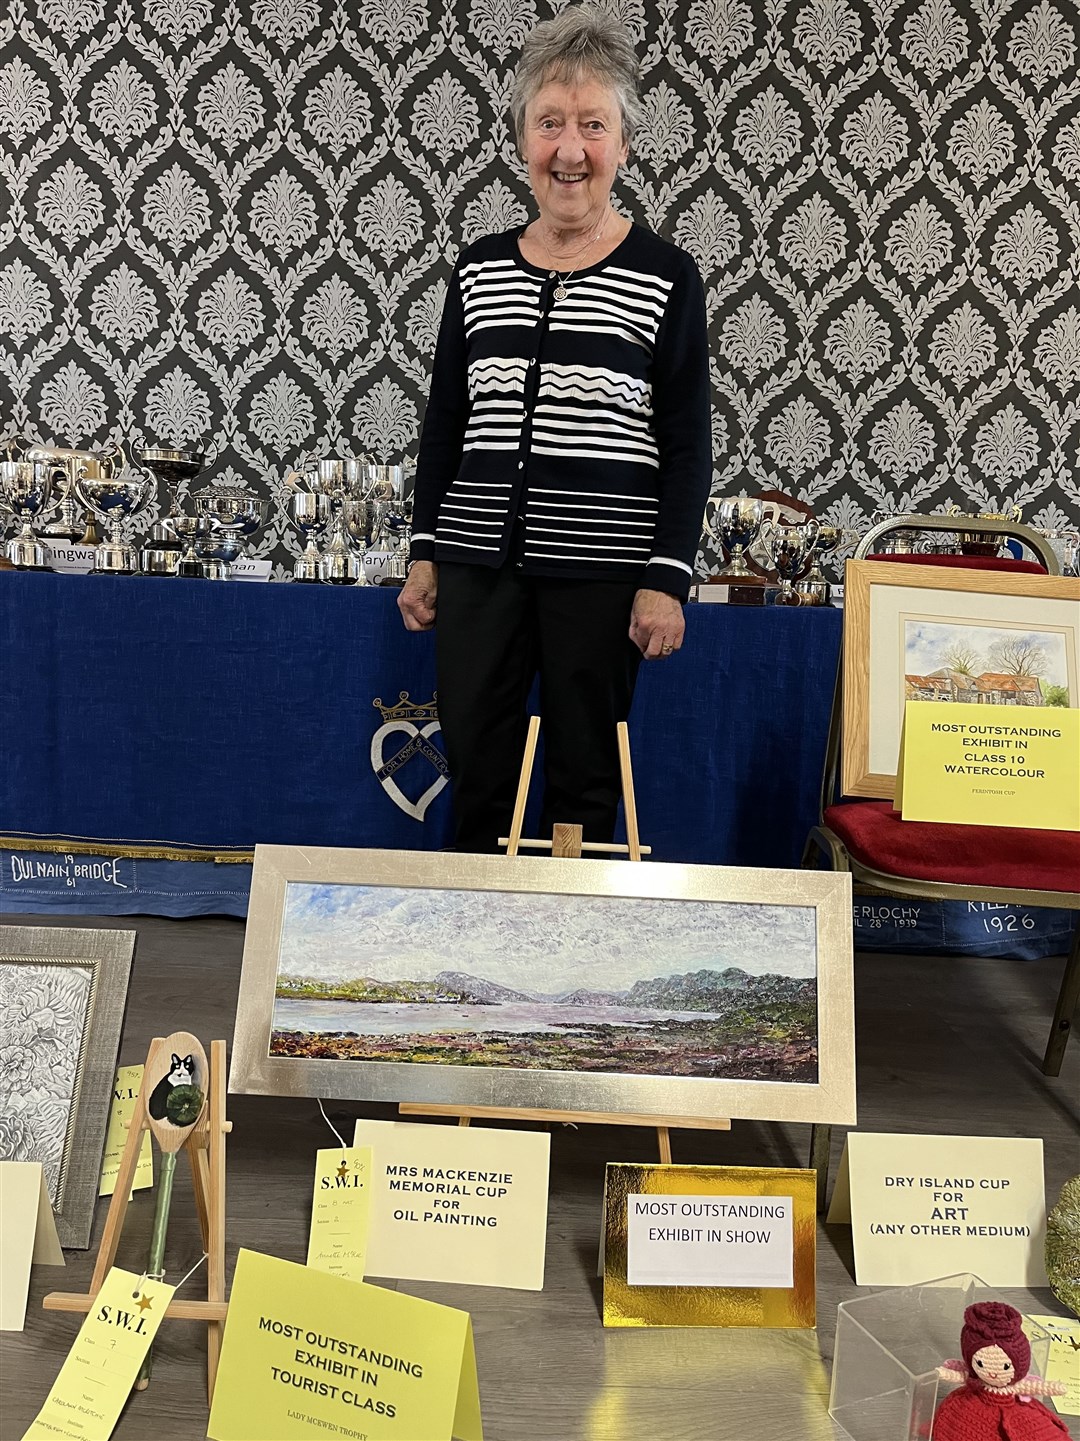 Annette Mckee with her oil painting which won most outstanding exhibit in show and cup in oil painting. Annette won five cups at the show.